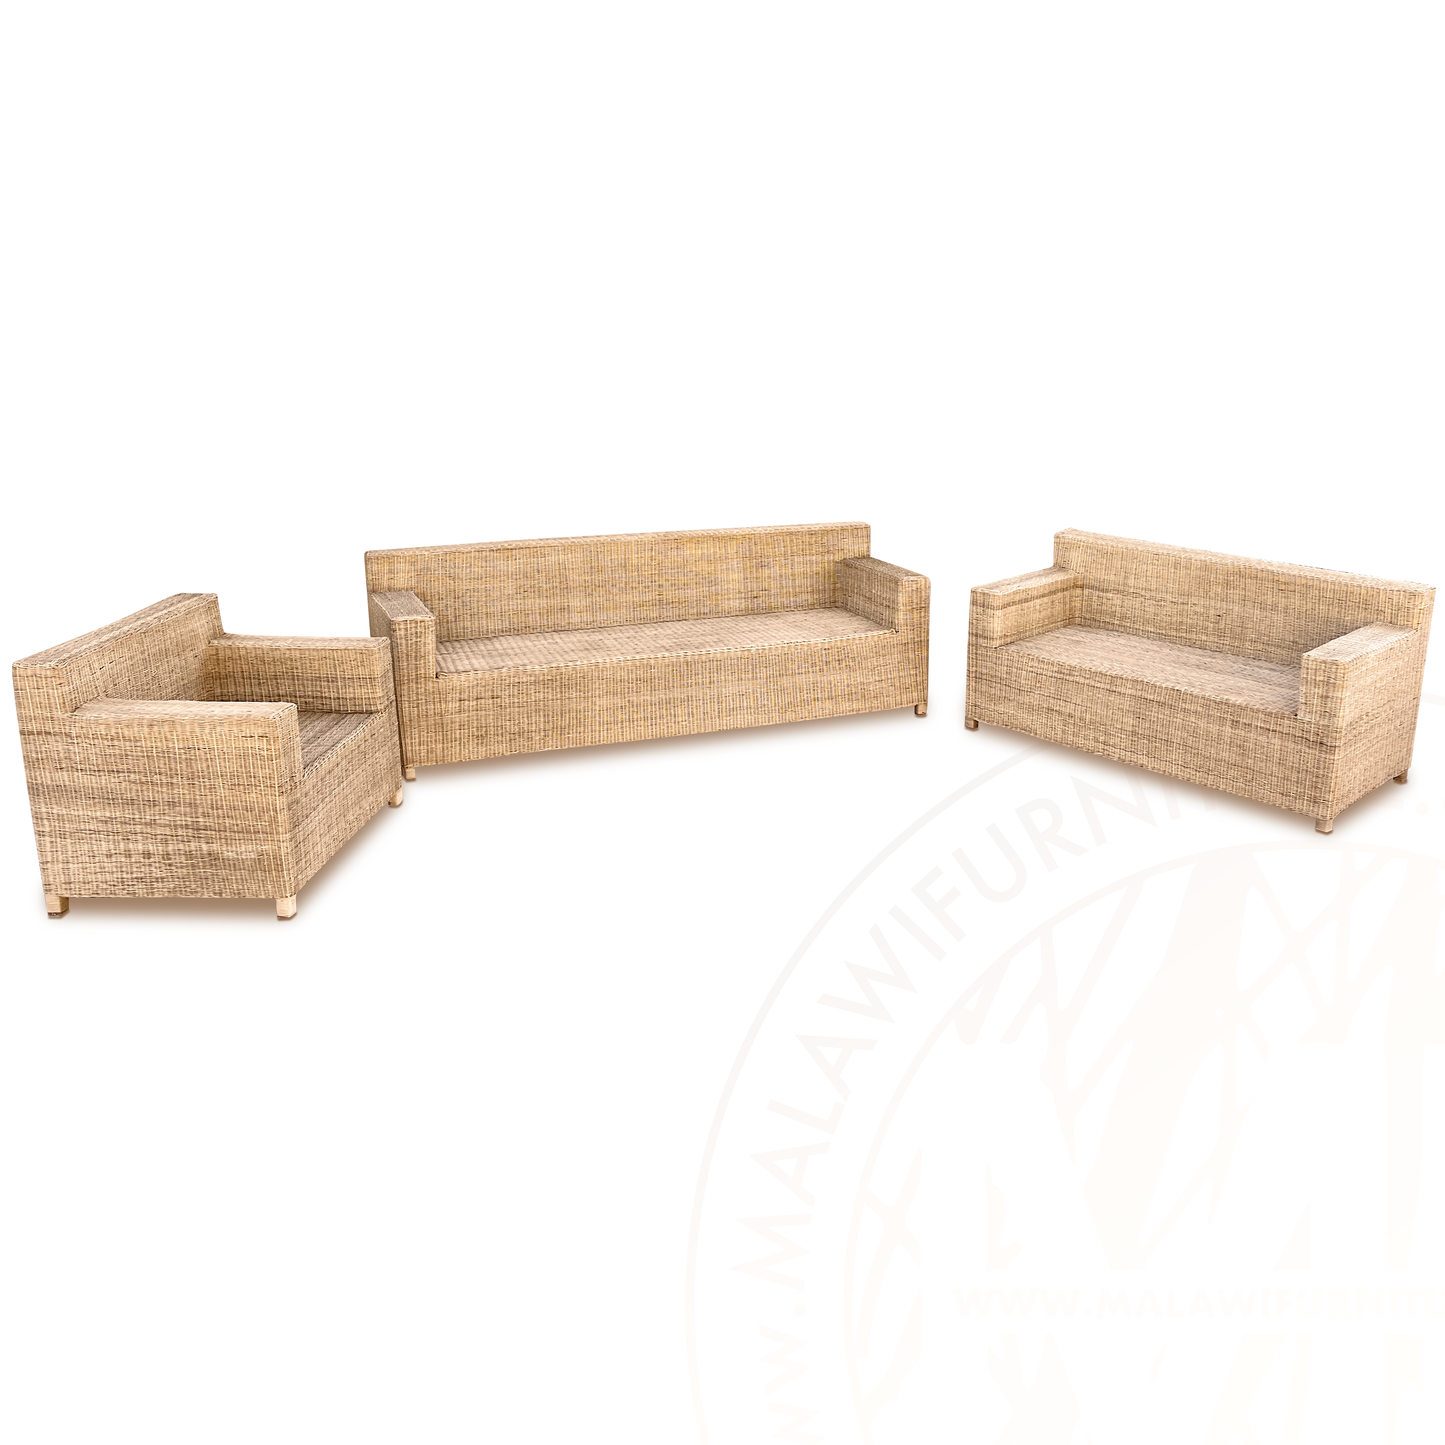 BOX Malawi Couch Set (Option 3) hand weaved woven rattan cane chair malawi with cushion